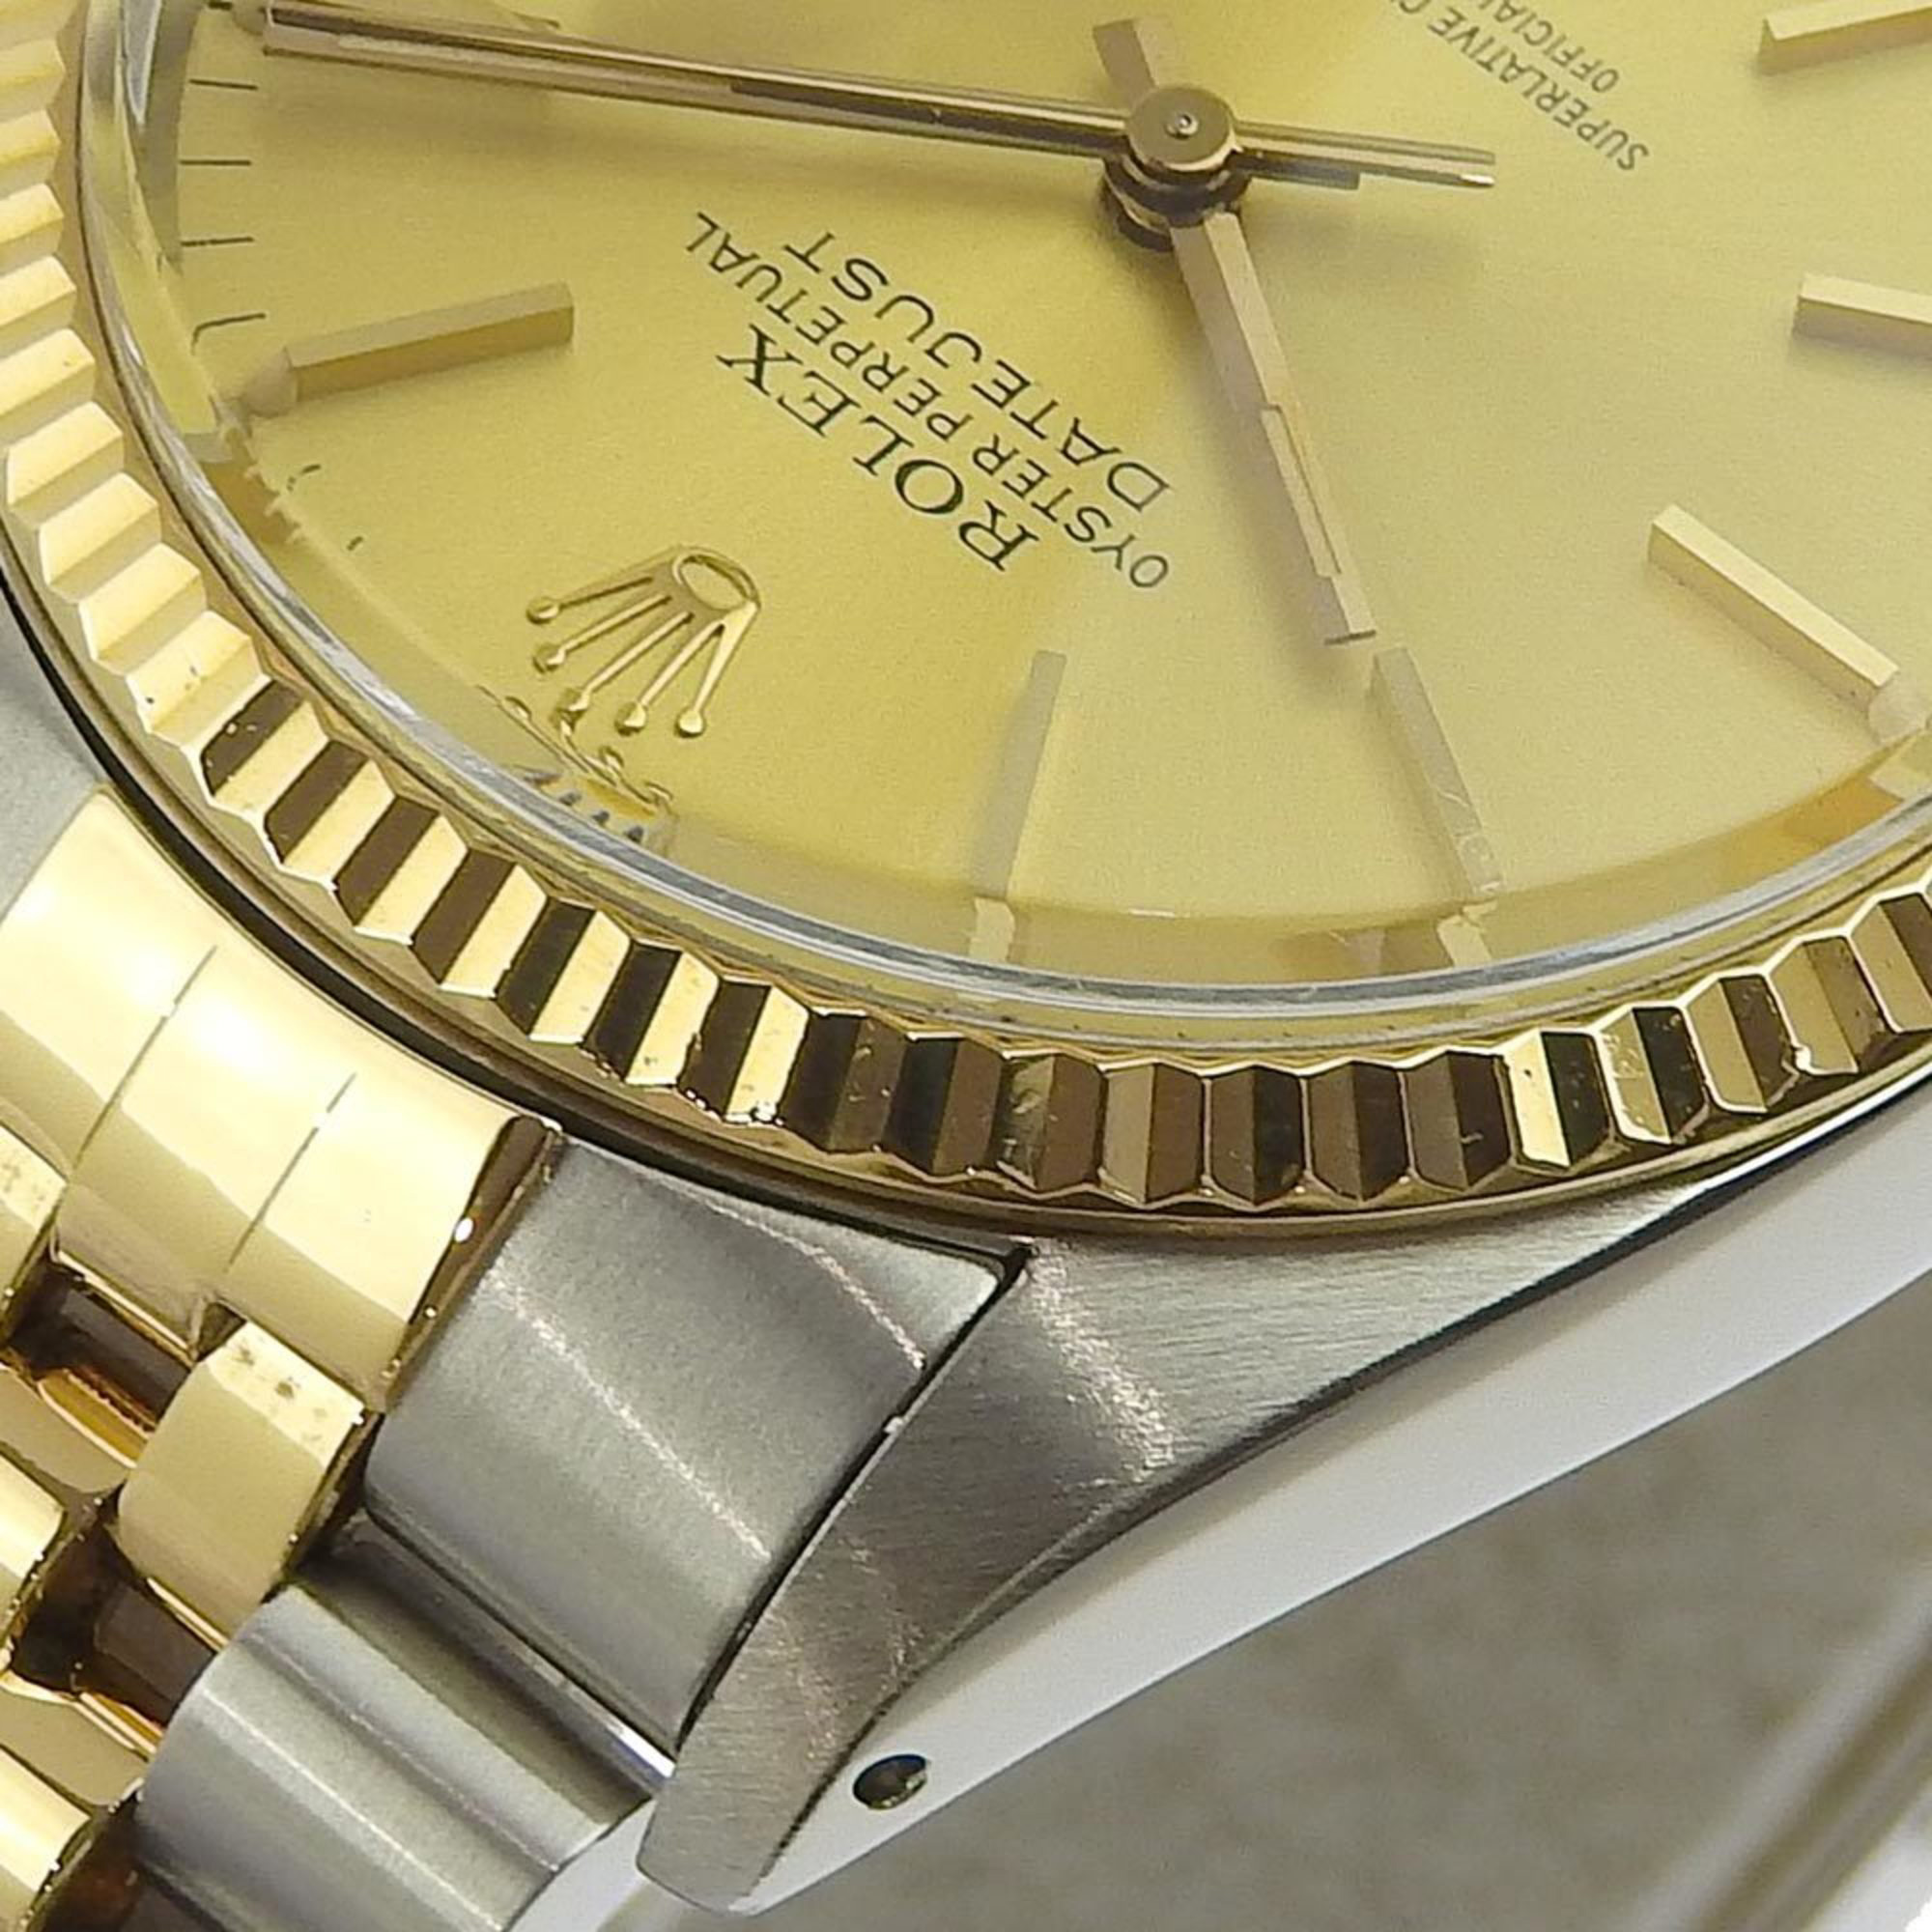 Rolex Champagne 18k Yellow Gold And Stainless Steel Datejust 16013 Automatic Men's Wristwatch 36 Mm